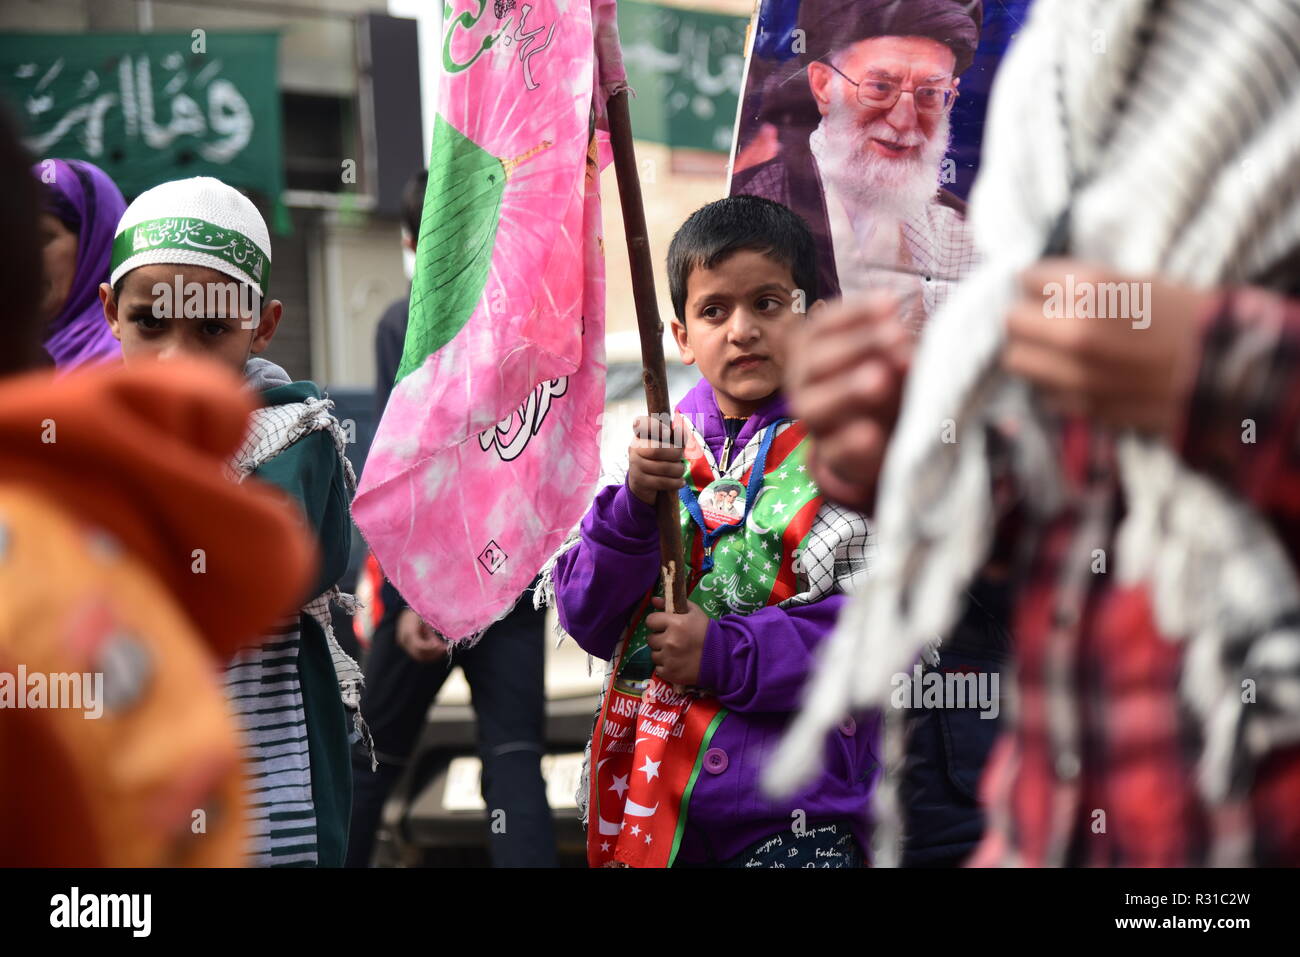 Kashmiri Shia Muslim student seen looking on during a march rally marking Eid-i-Milad-un-Nabi, the birth anniversary of Prophet Muhammad PBUH. Muslims across the world celebrated Eid-e-Milad-un-Nabi, the birth anniversary of the Prophet Mohammed on 12 Rabil ul Awal, a month of the Muslim calendar which falls on 21 November 2018. Stock Photo